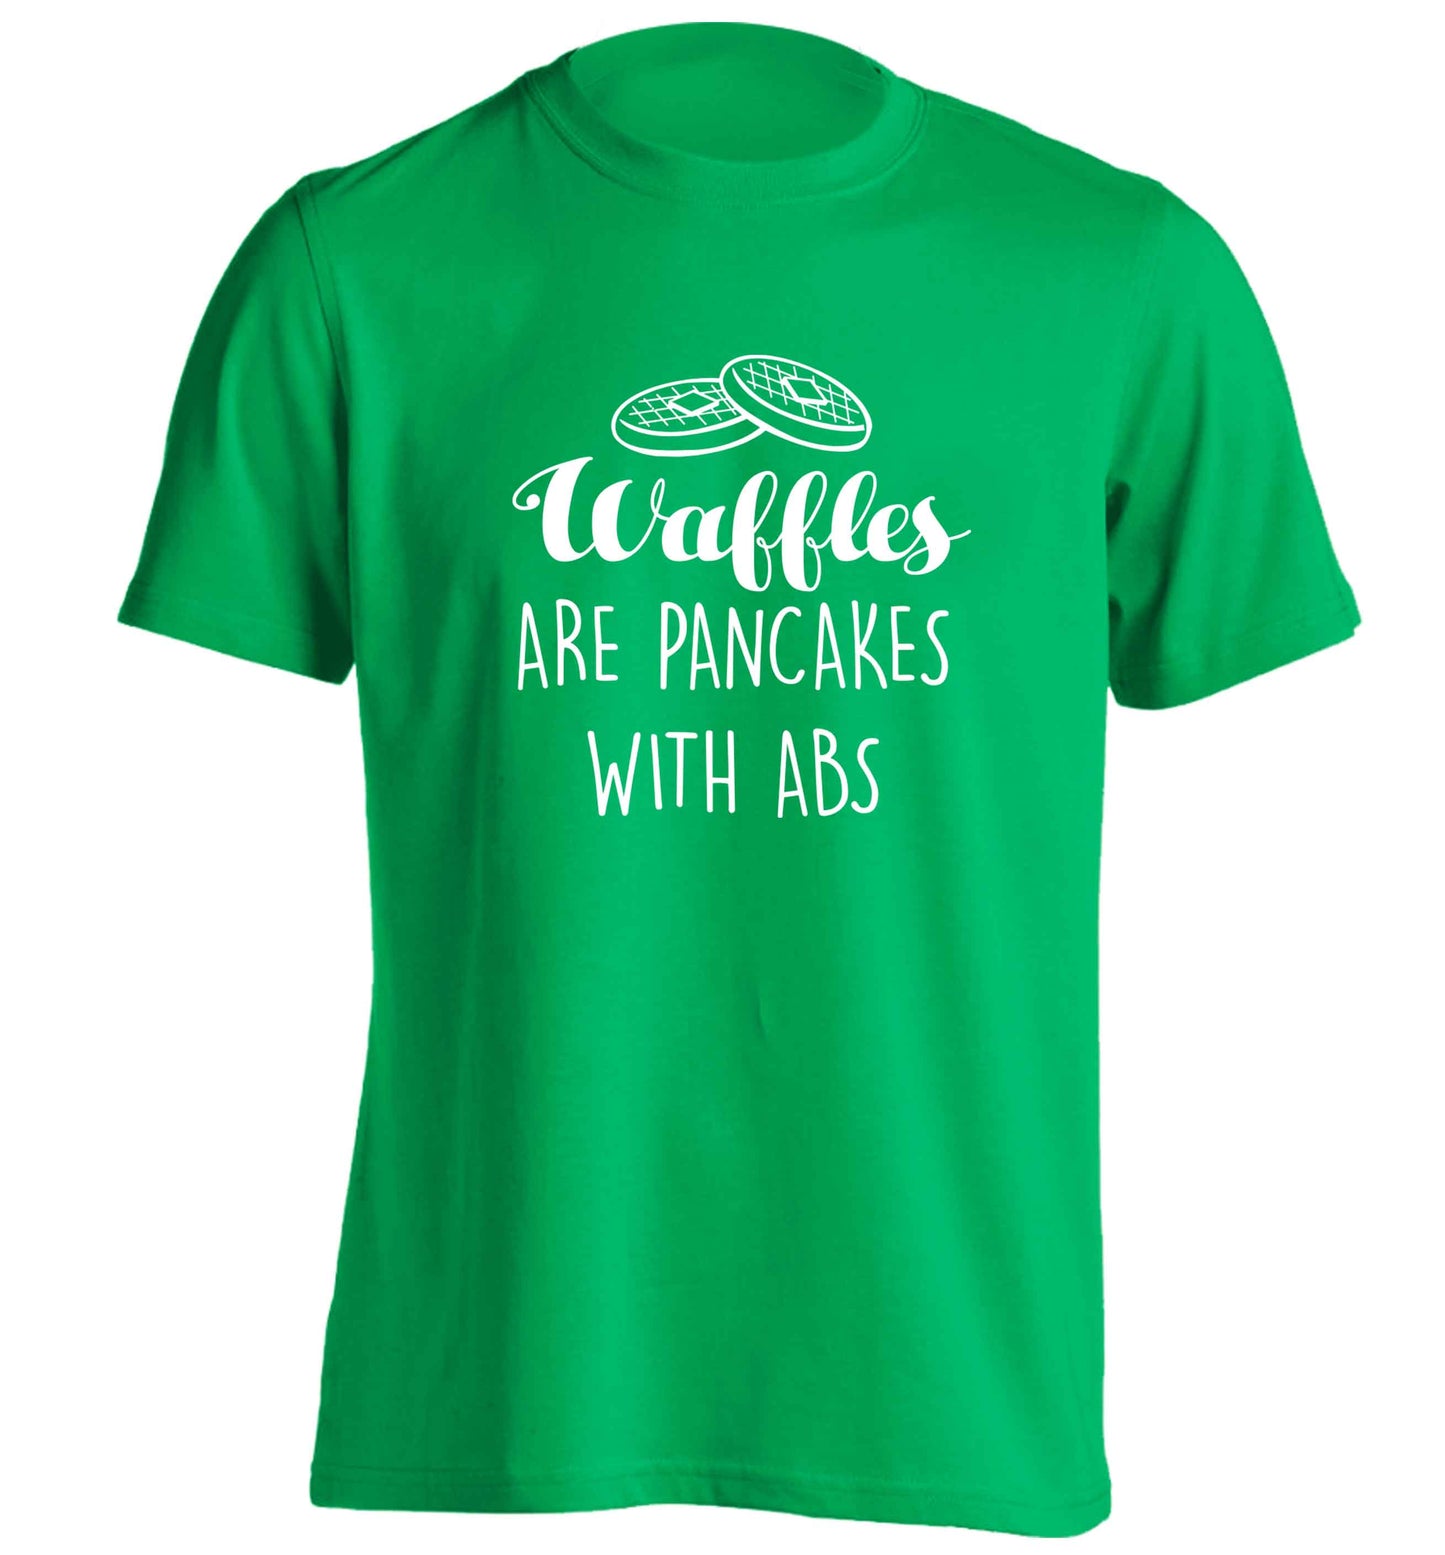 Waffles are just pancakes with abs adults unisex green Tshirt 2XL